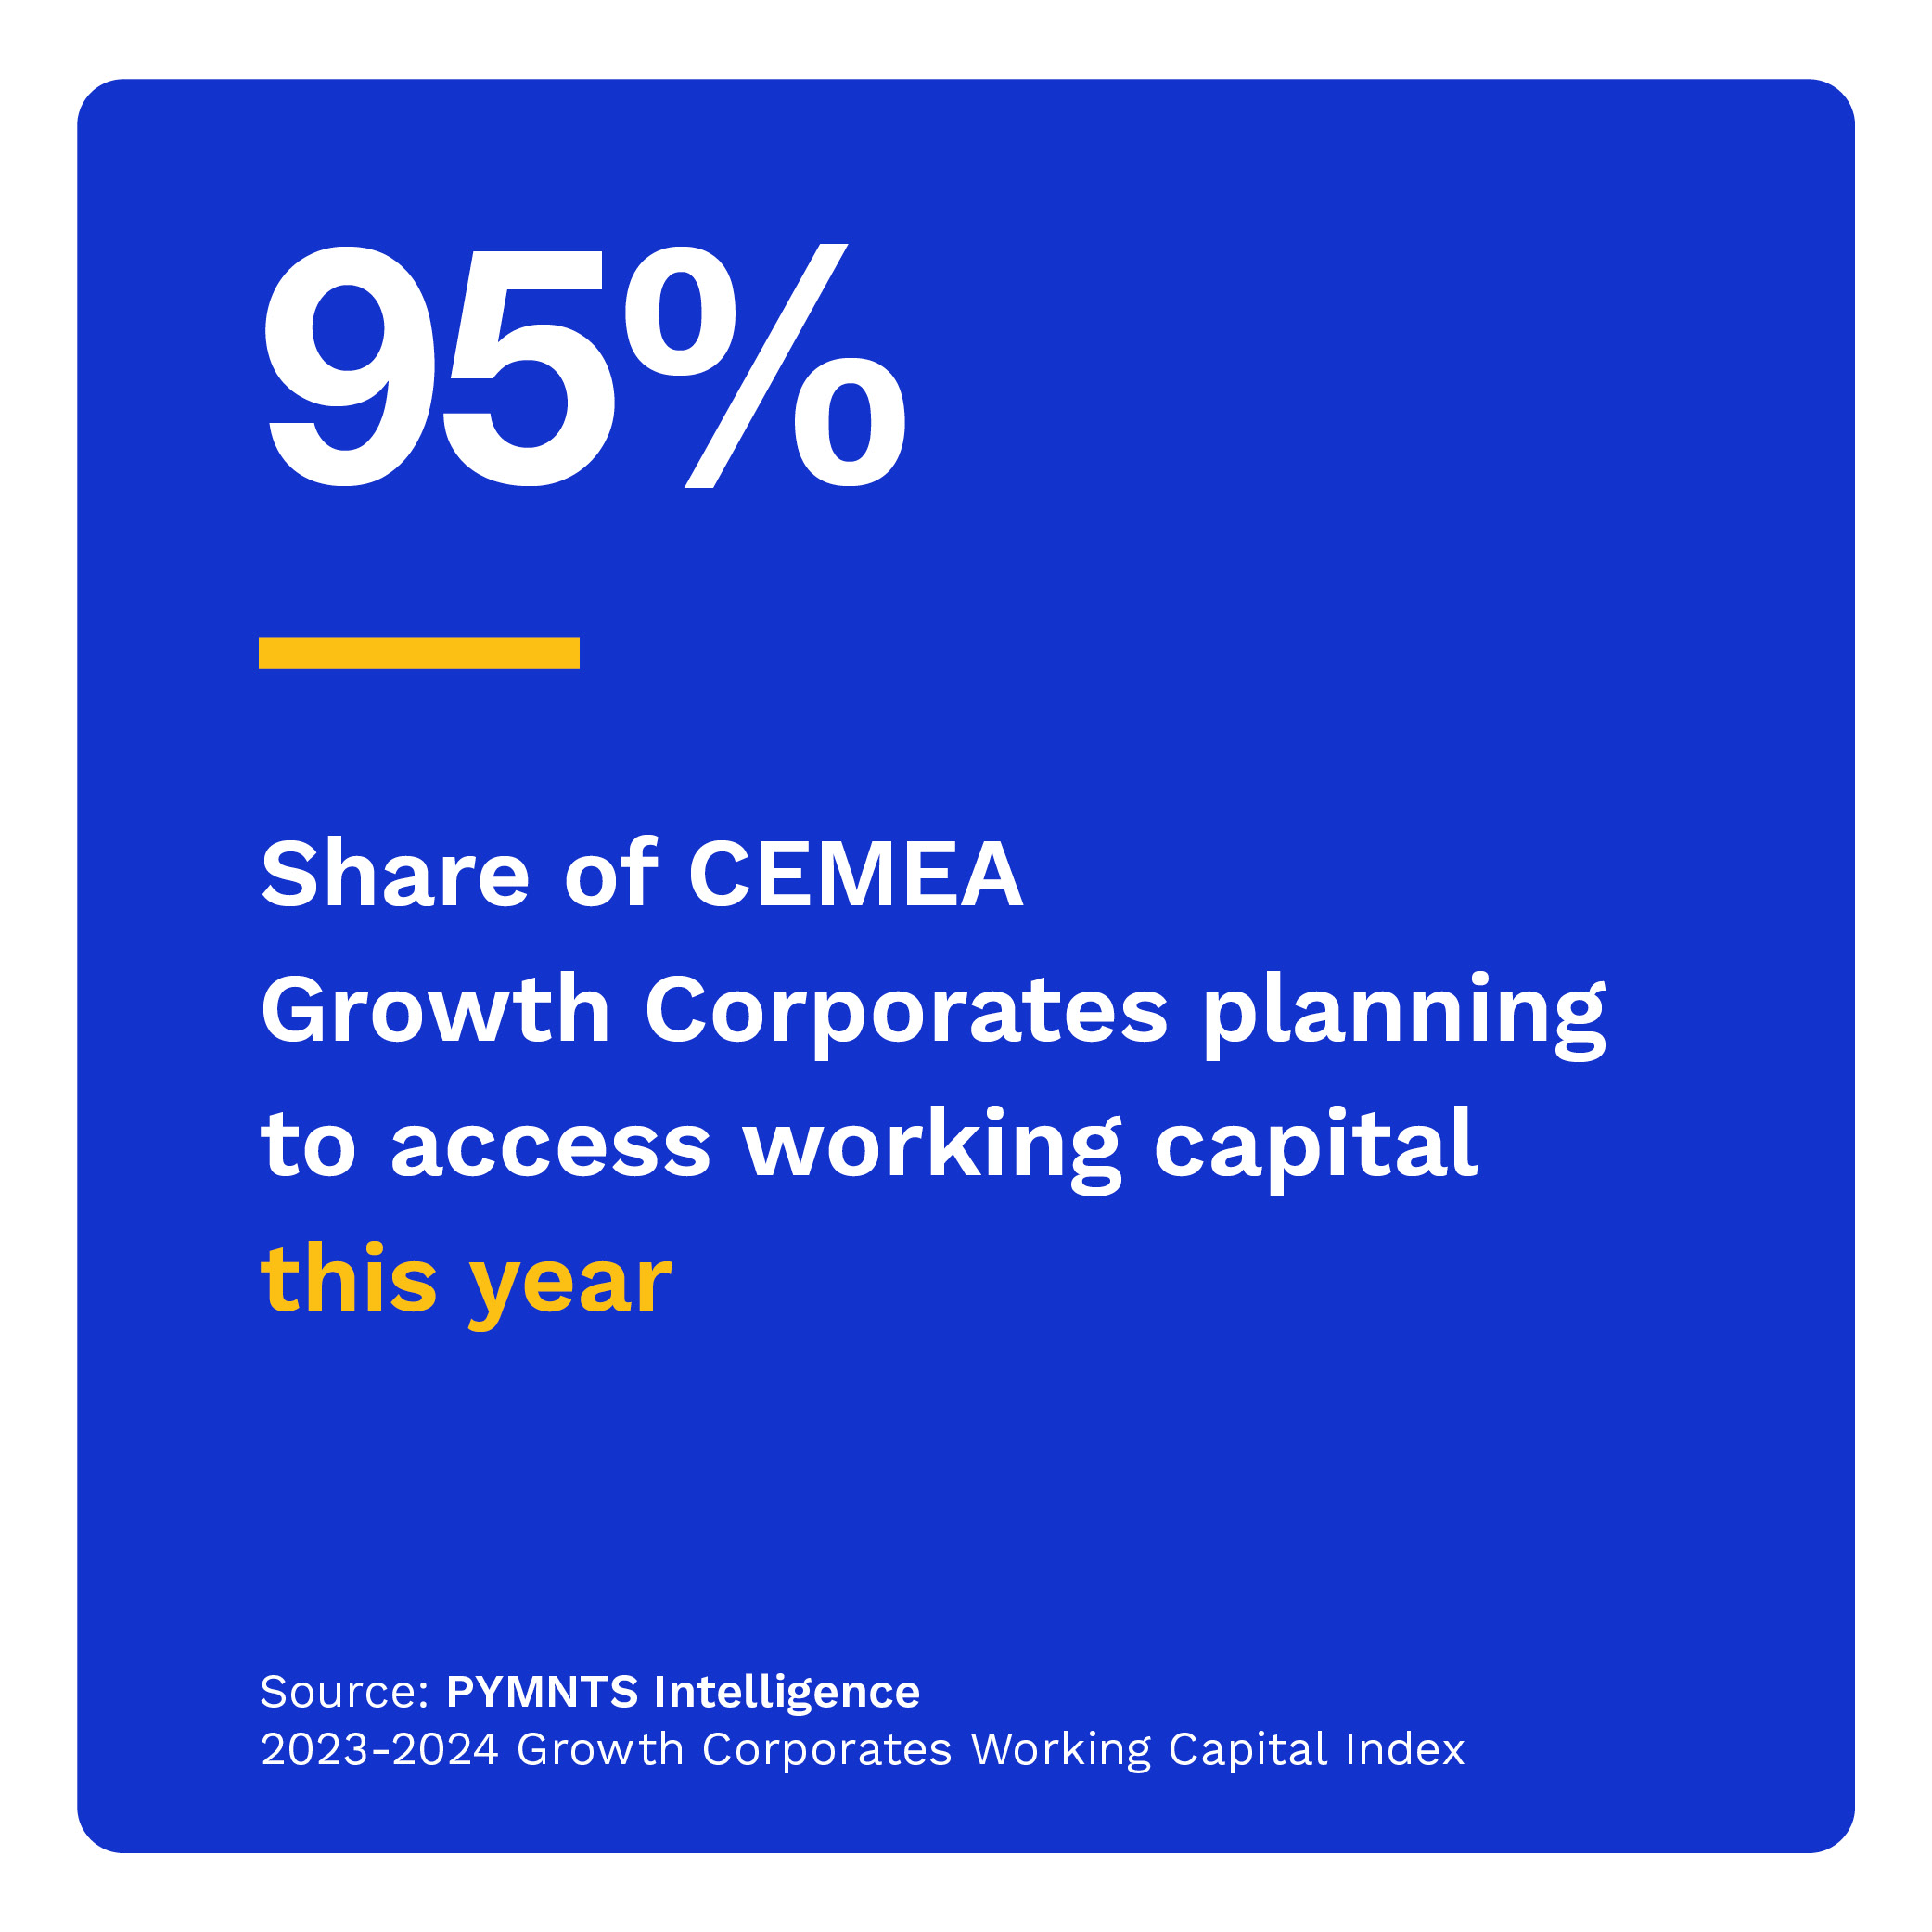 95%: Share of CEMEA Growth Corporates planning to access working capital this year